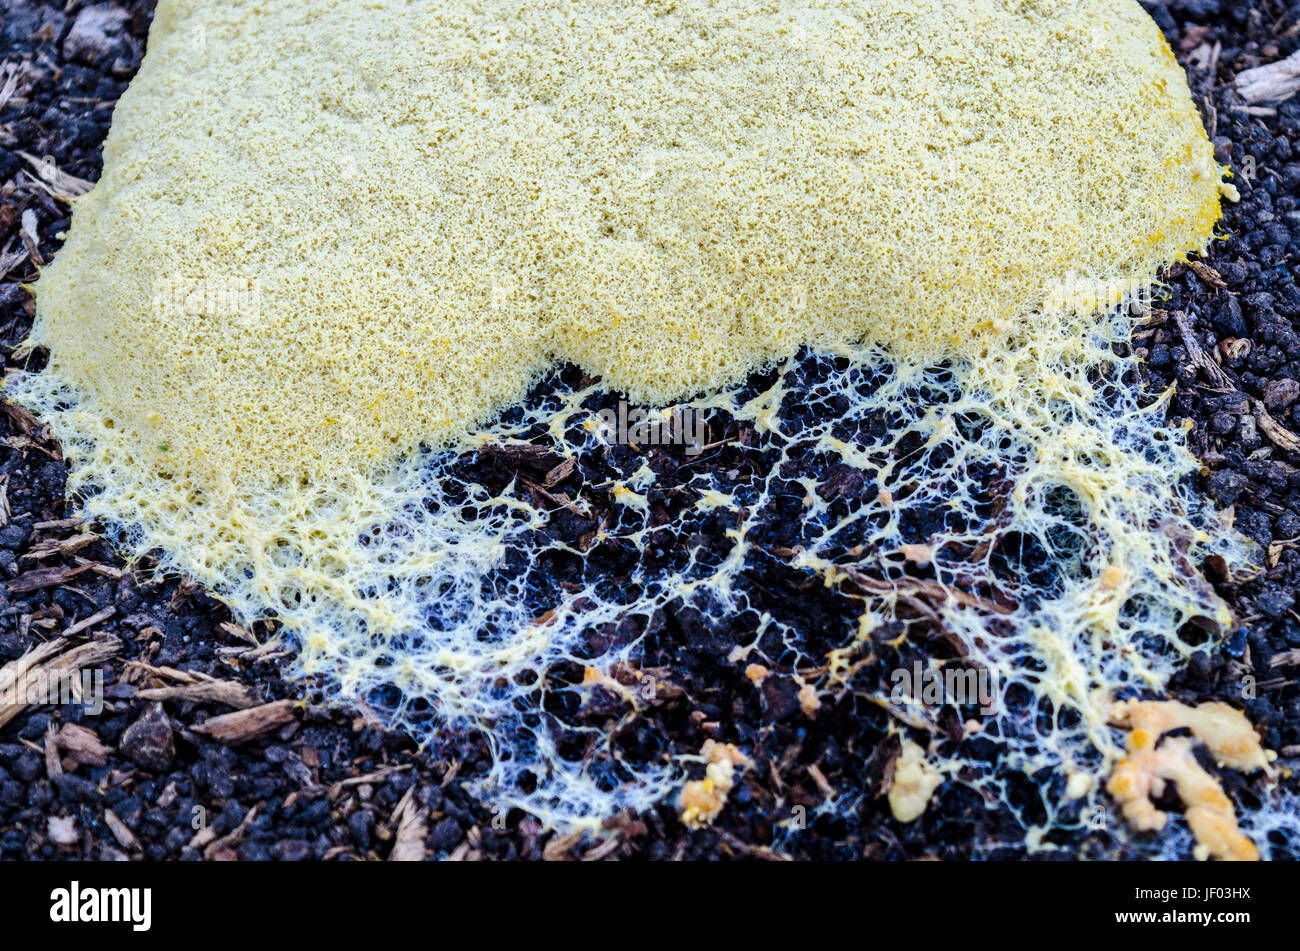 Dog Vomit Slime mold (Fuligo septica) at a site where a tree was recently removed in San Leandro California Stock Photo